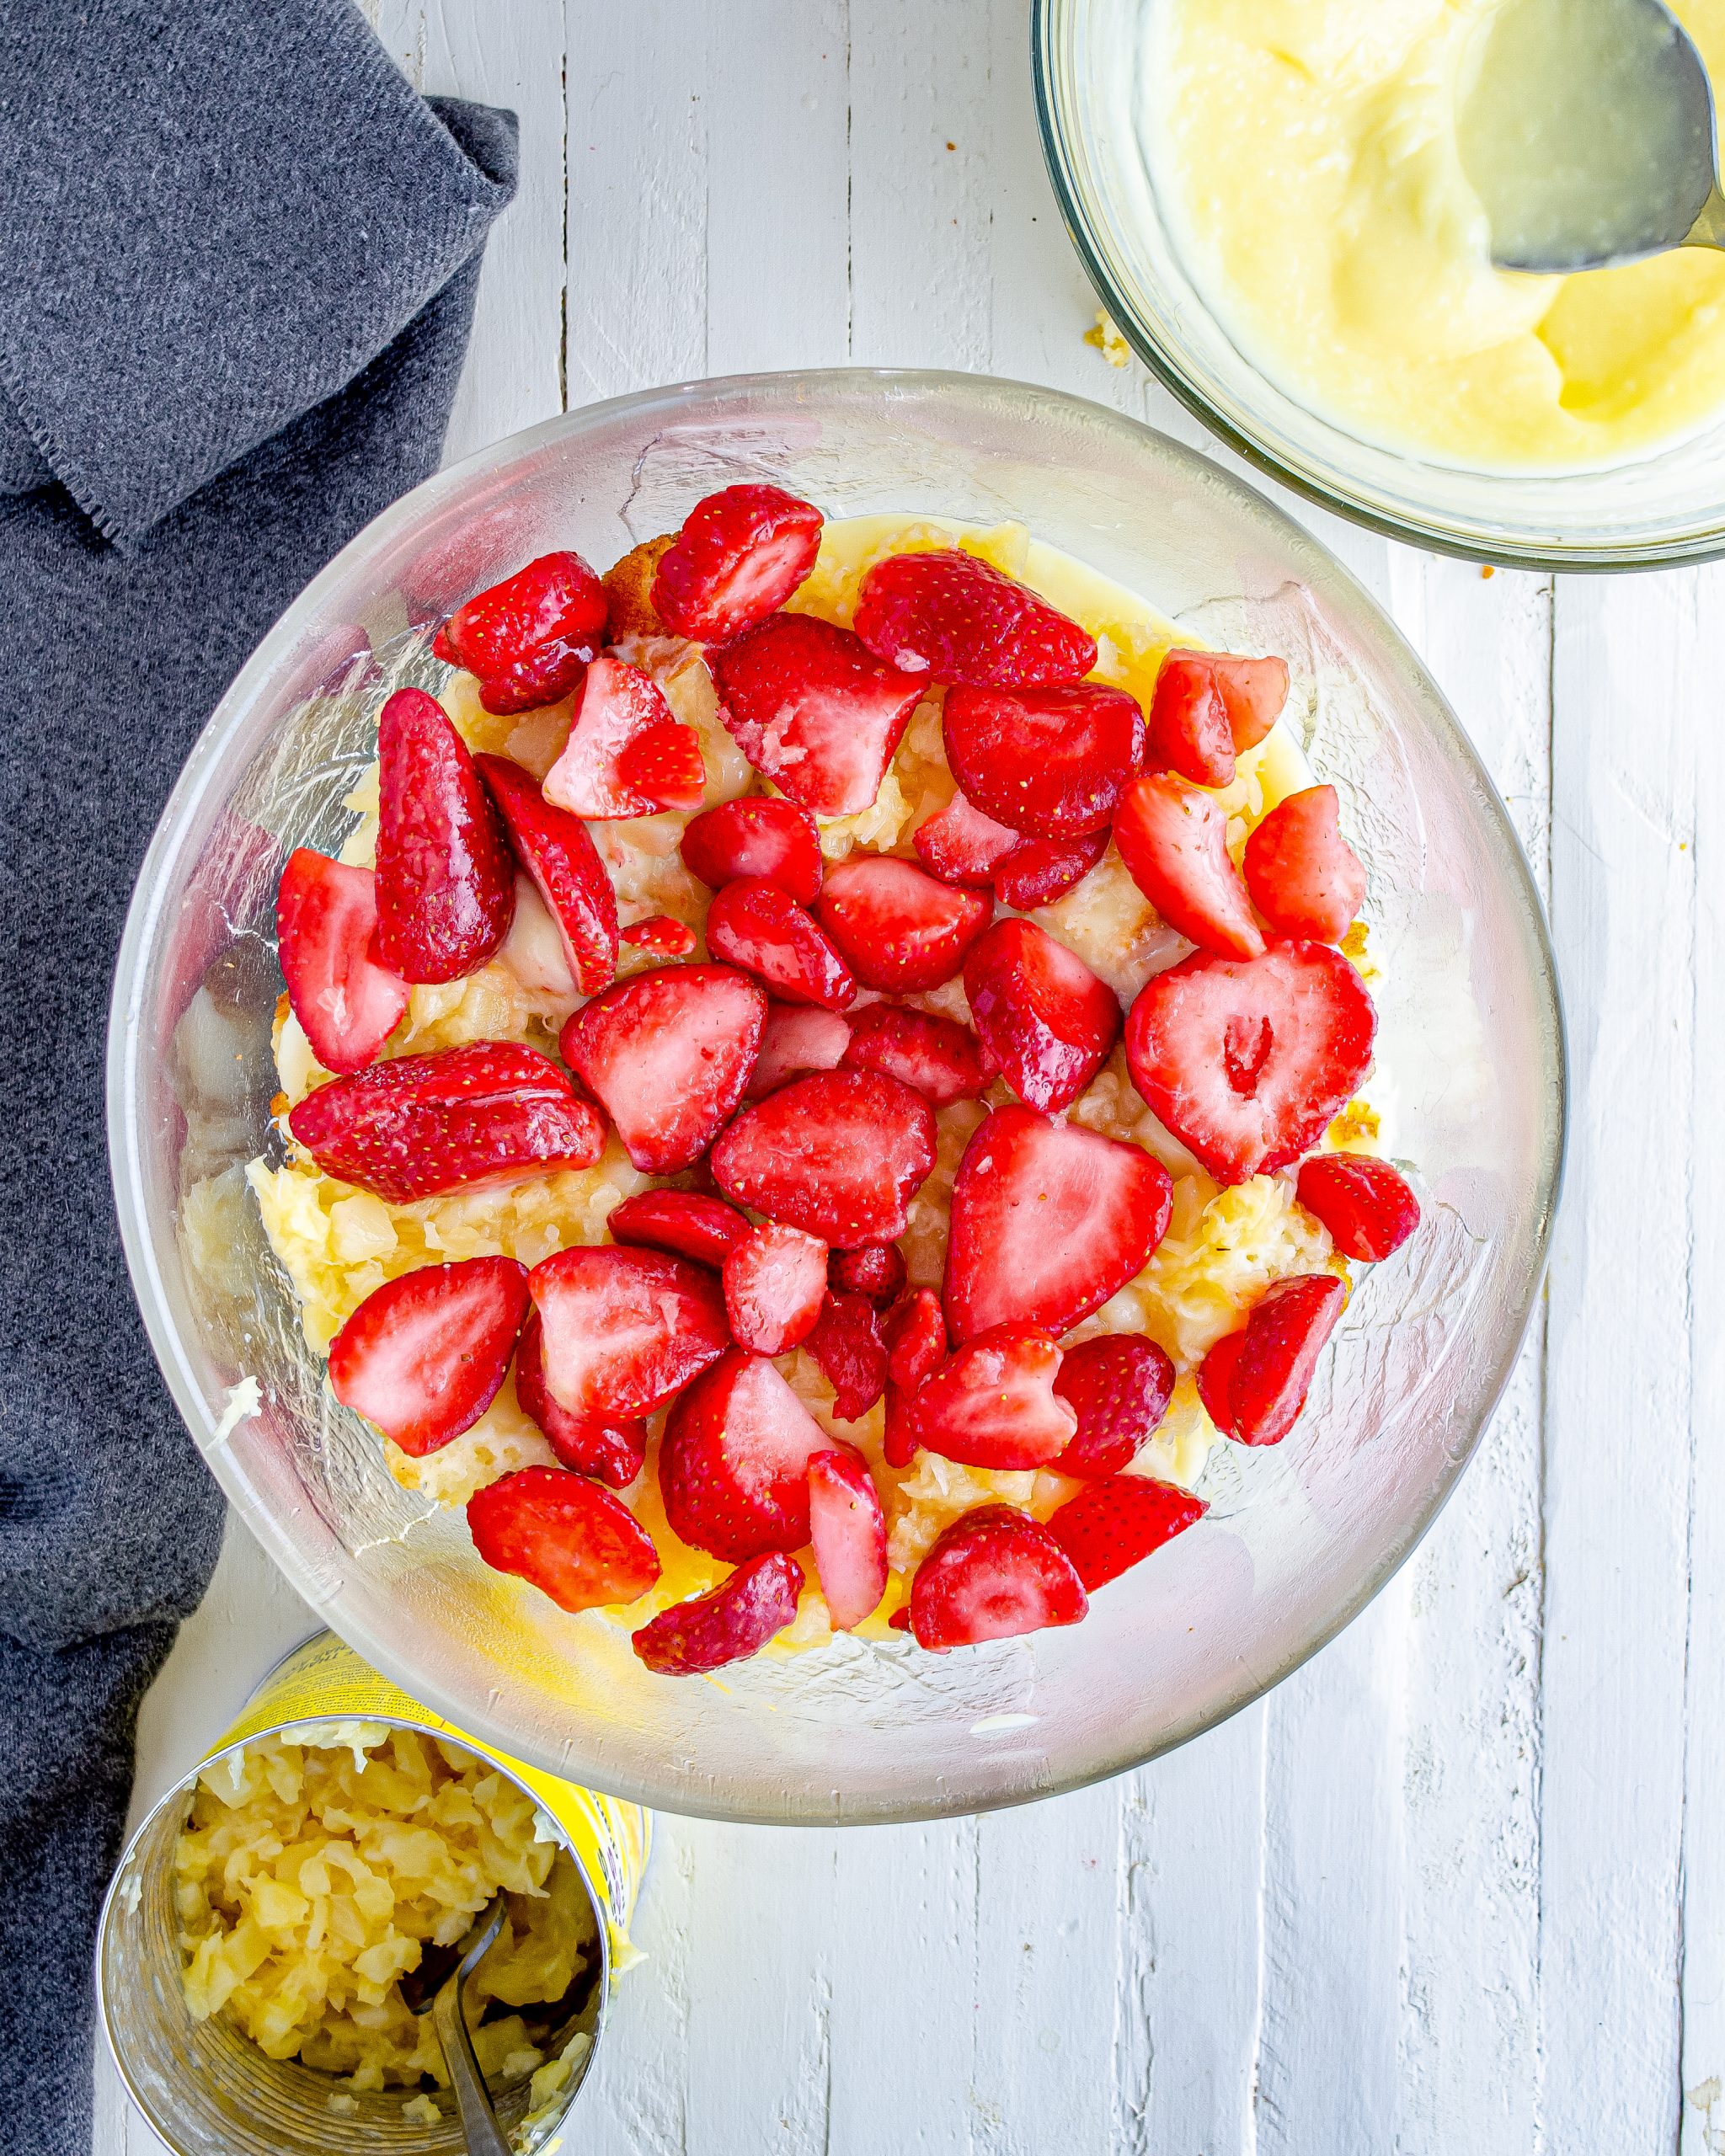 Add 1 package of strawberries to the serving bowl.